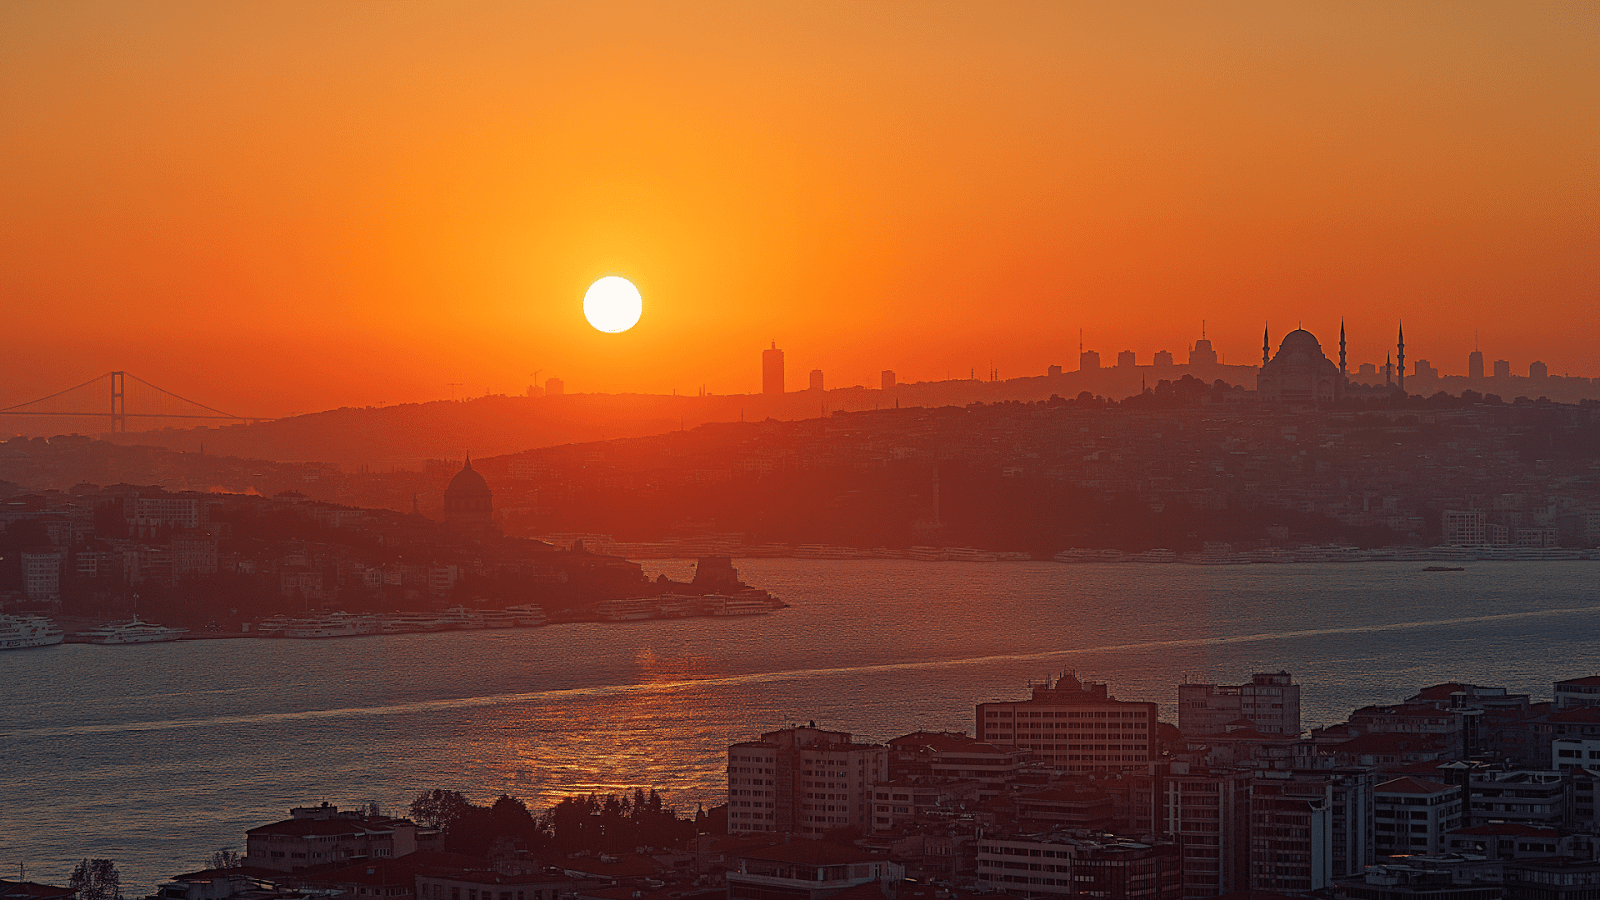 The sun setting over the Bosphorus, casting a golden glow over the city, epitomizing the melding of history and modernity in Istanbul